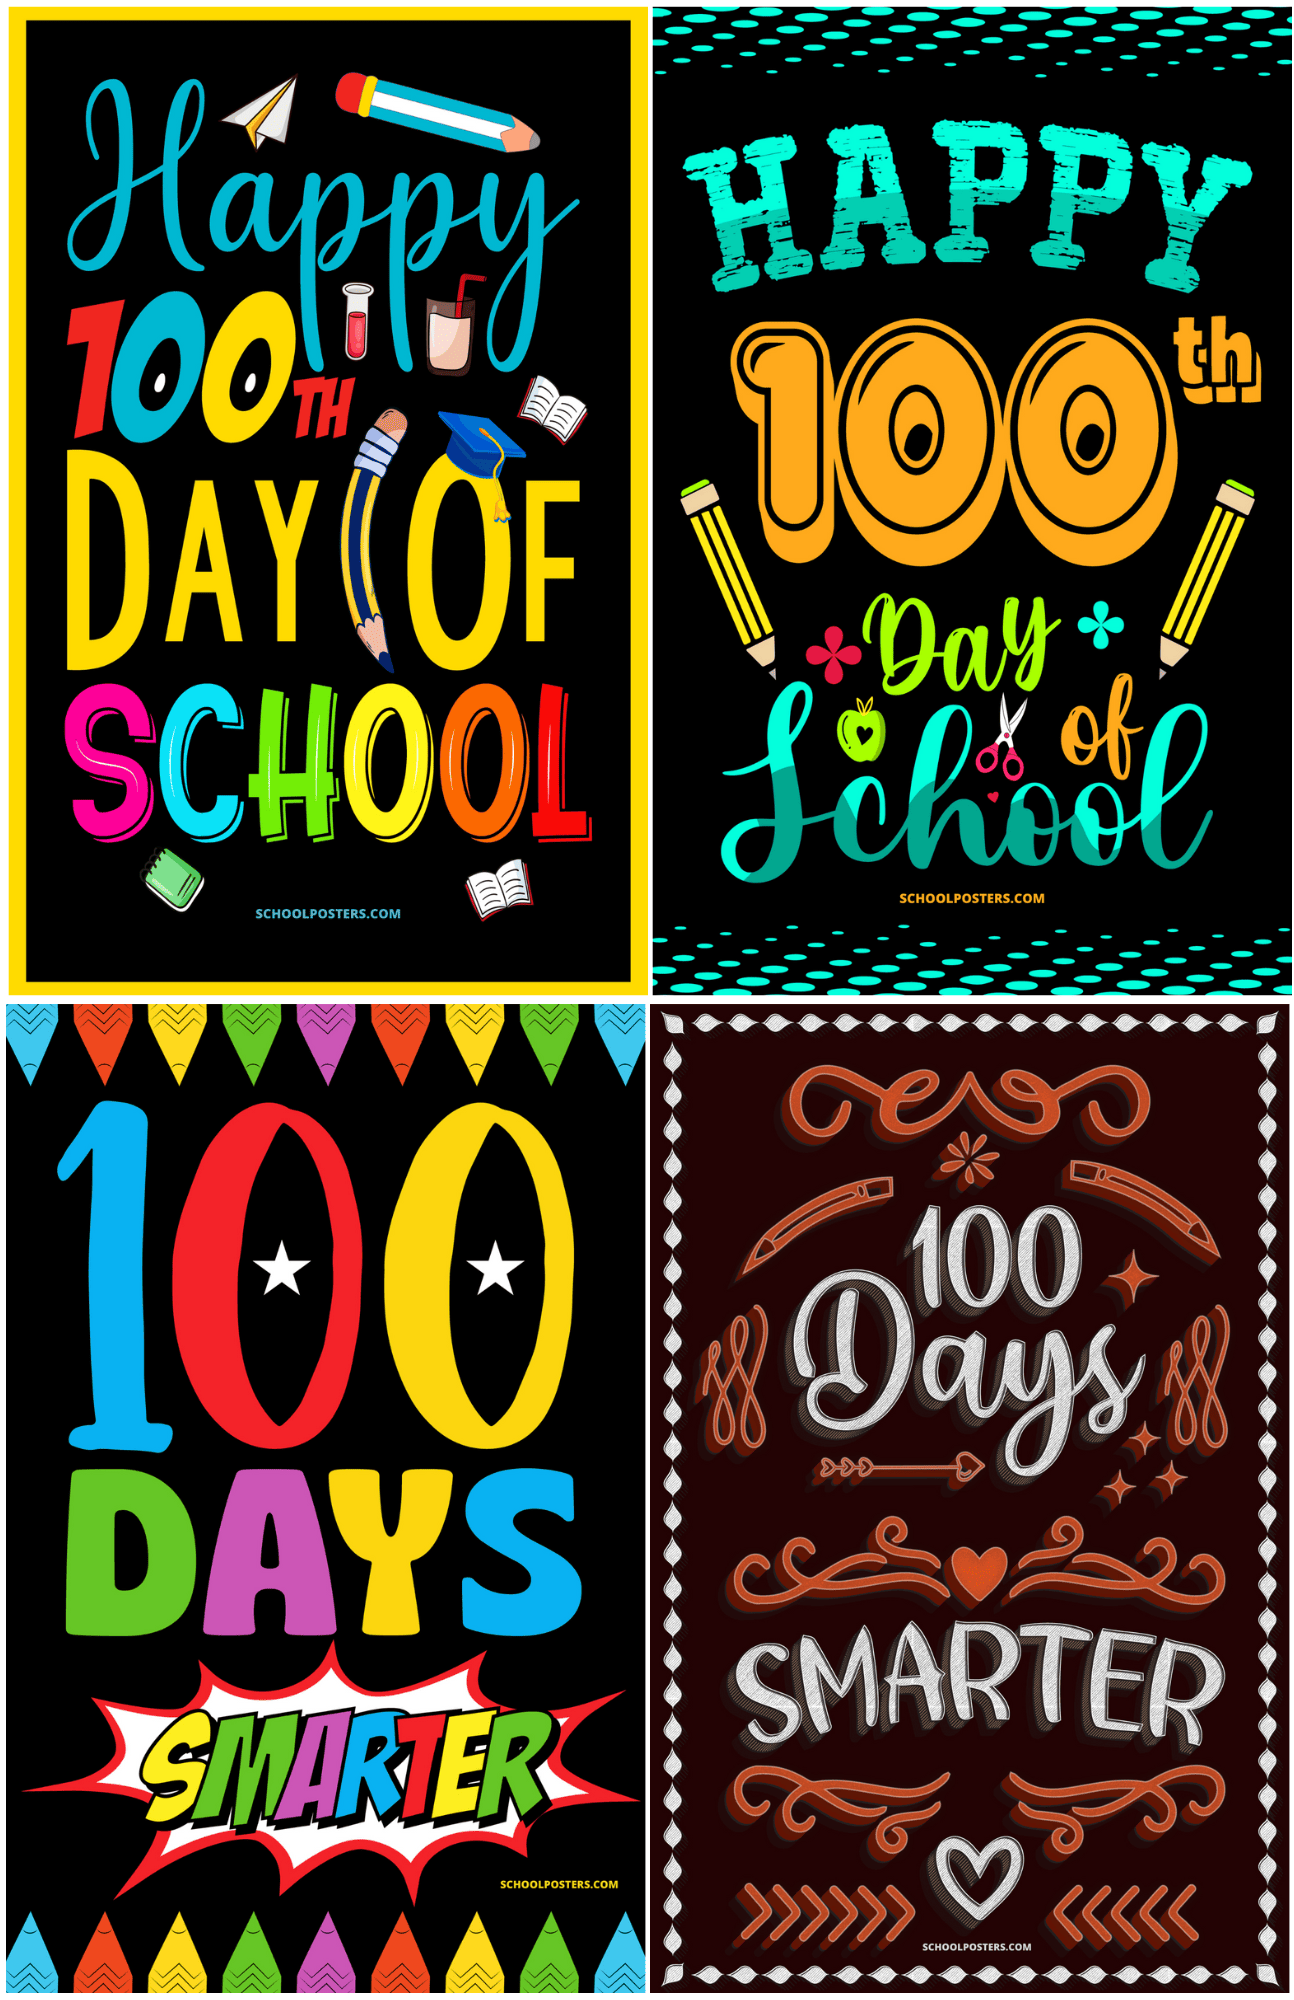 100 Days of School Poster Package